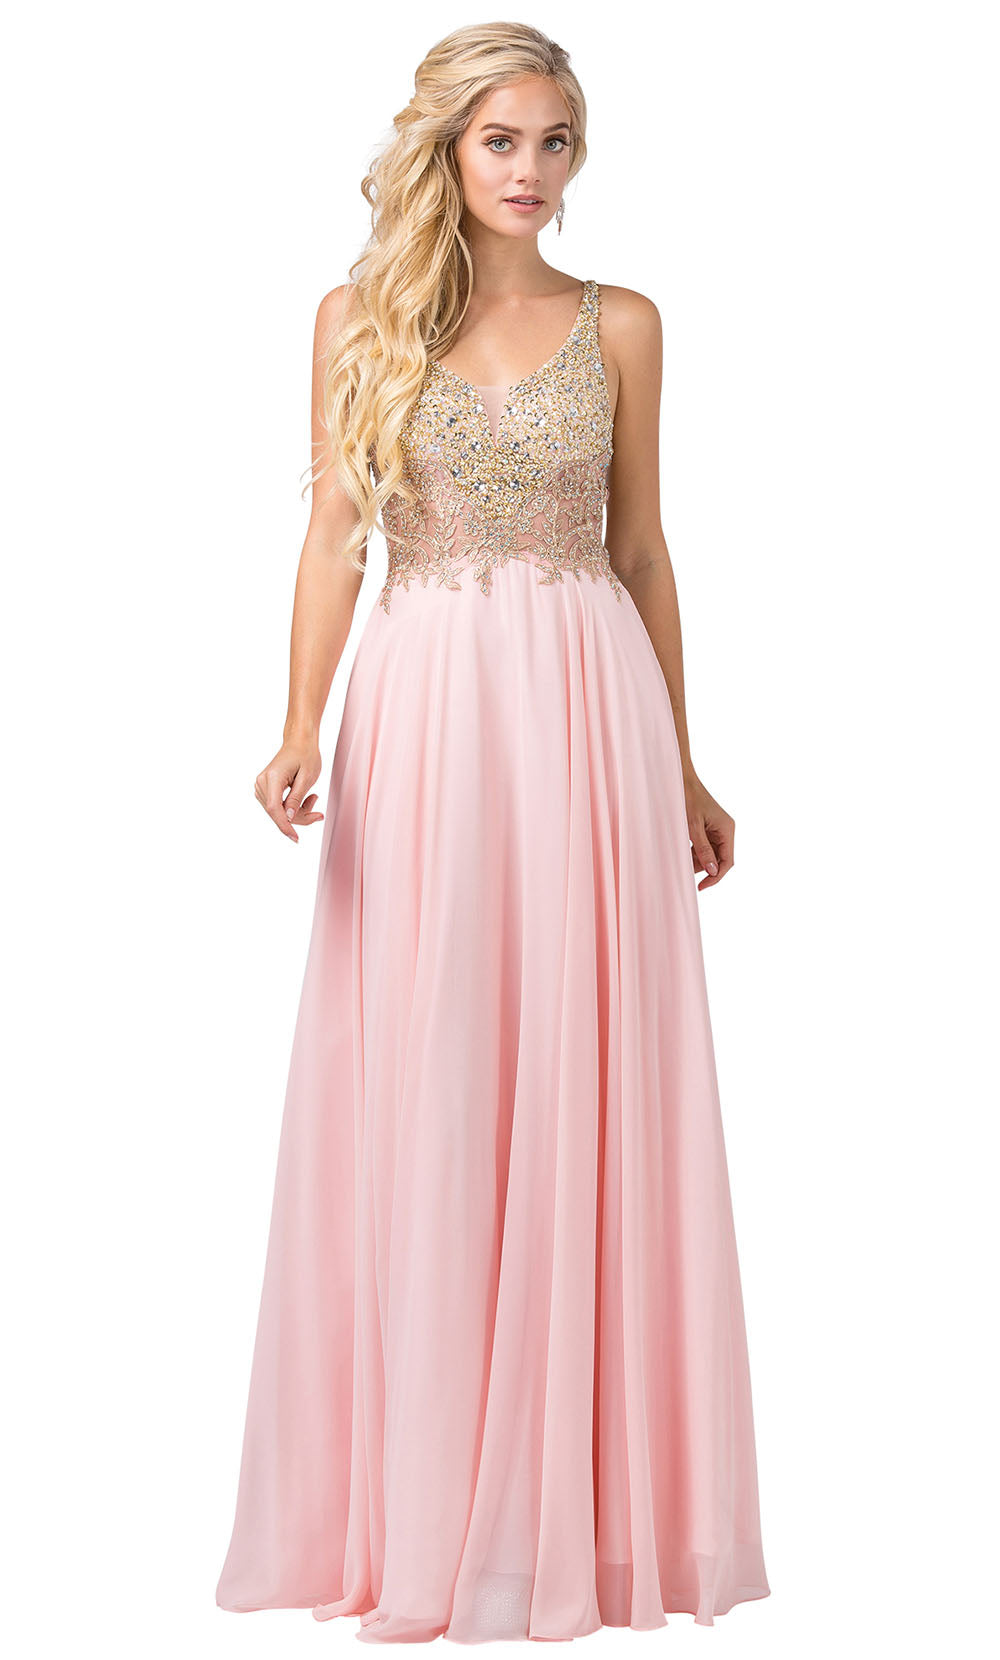 Dancing Queen - 2494 Beaded Gold Applique Bodice A-Line Gown In Pink